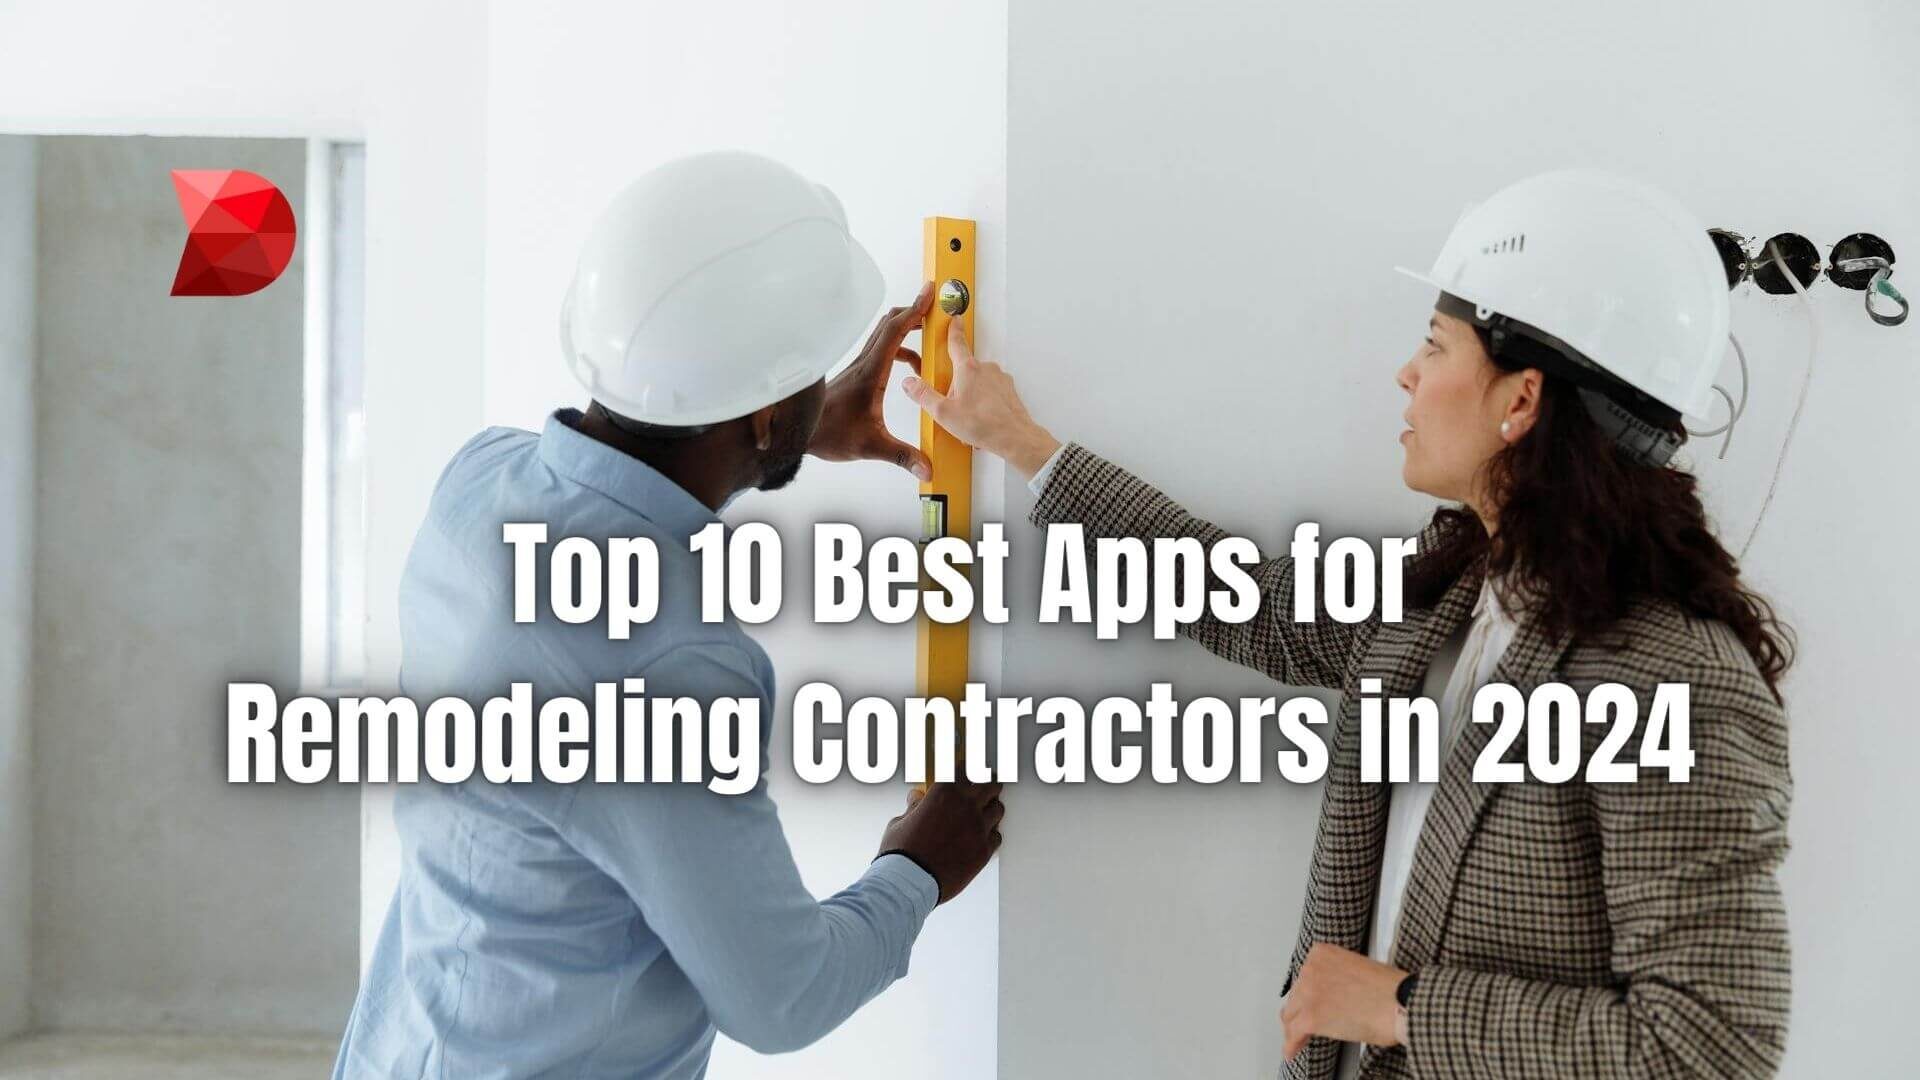 Revolutionize your remodeling game in 2024! Click here to uncover the top 10 apps for remodeling every contractor should have.